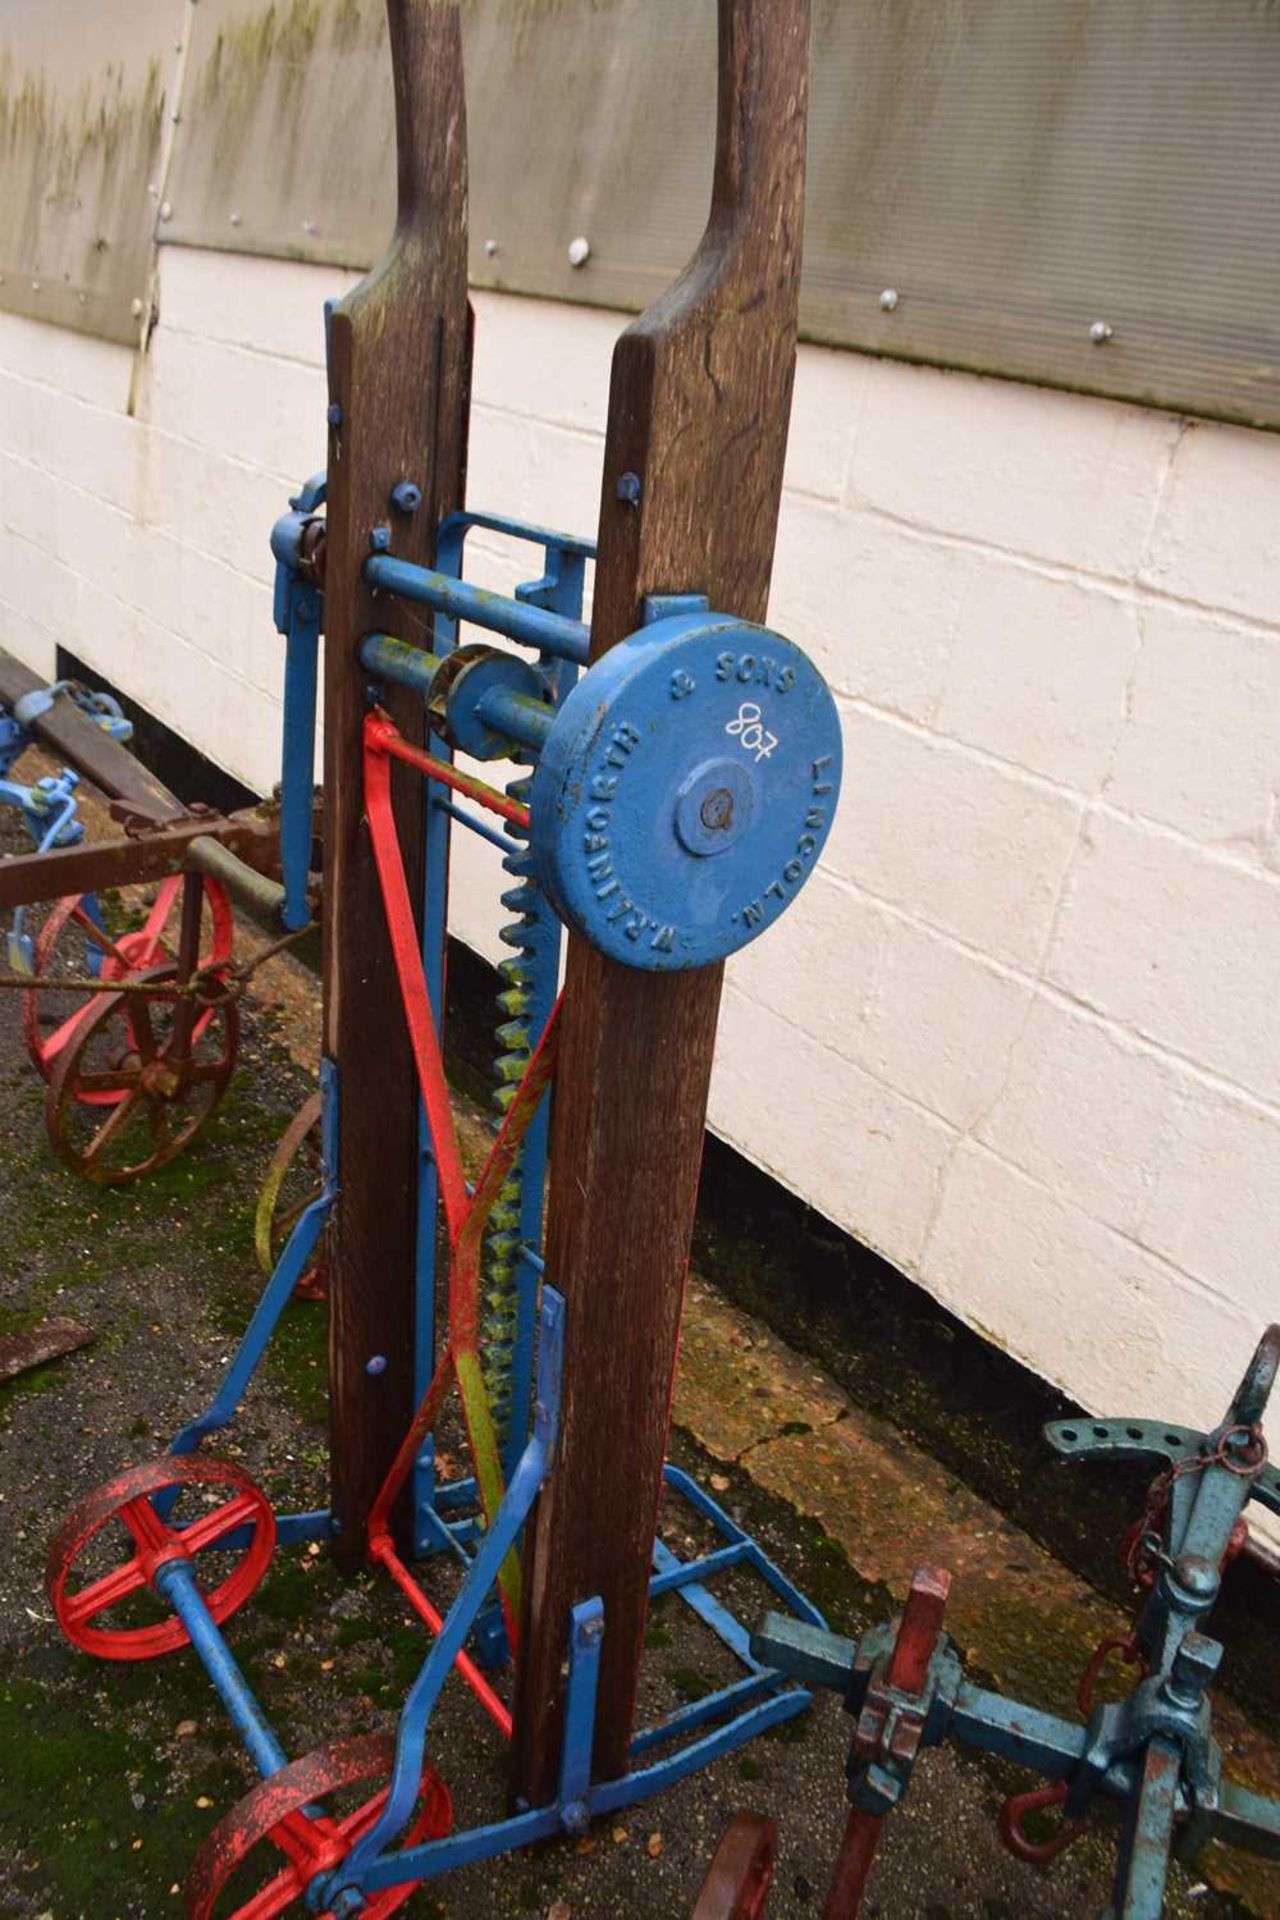 W Rainforth & Sons, Lincoln, a wood and iron framed sack lifting barrow with blue and red painted